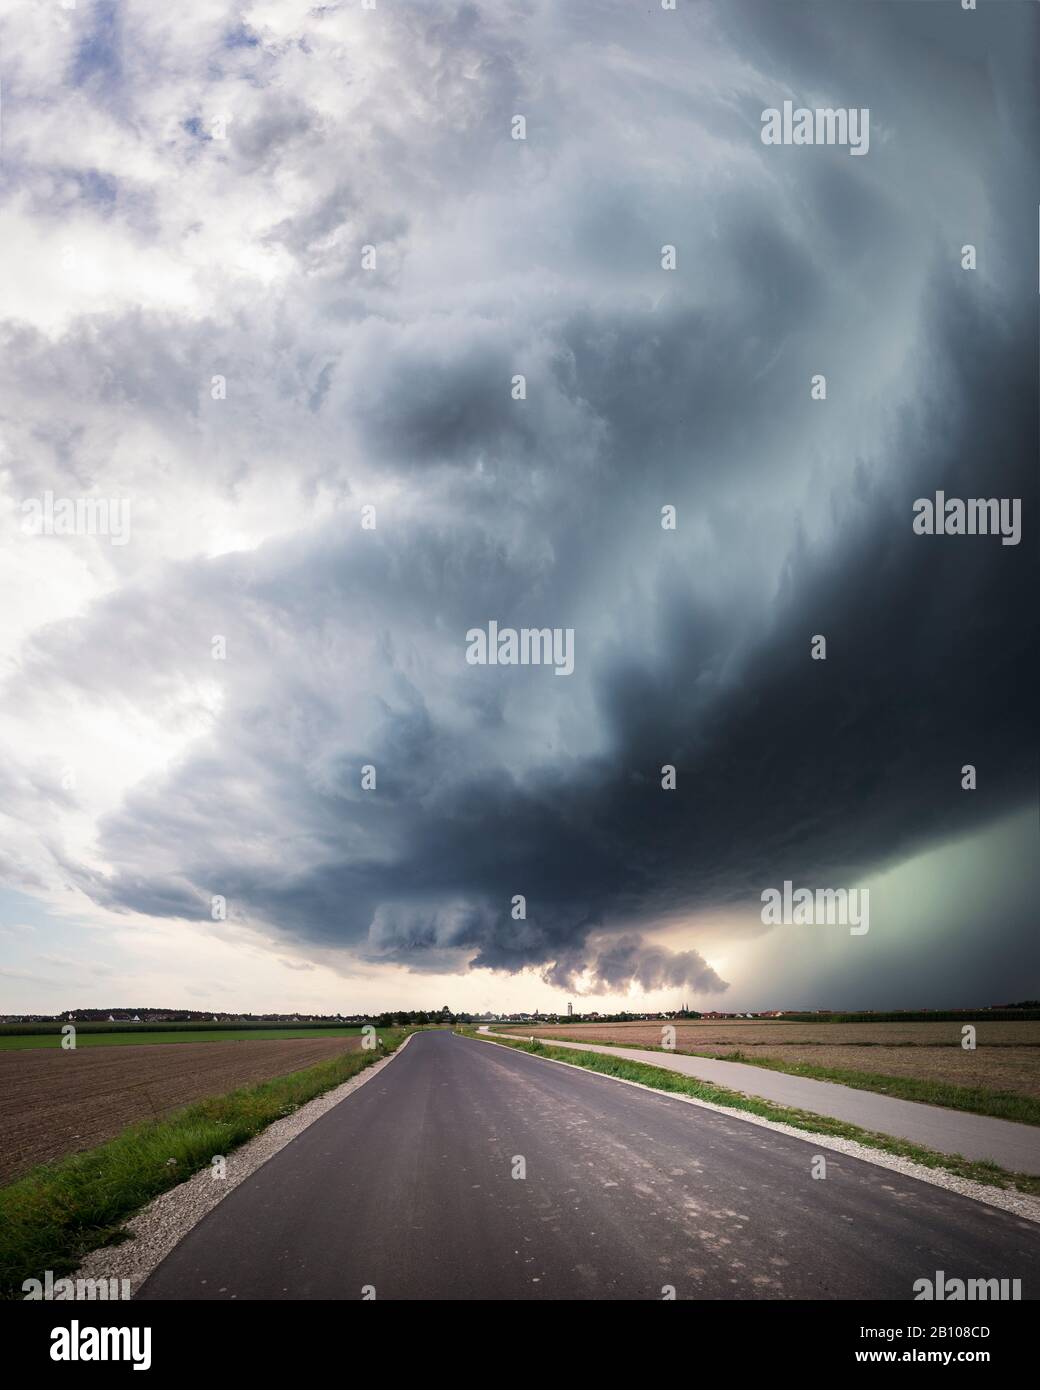 Panorama of a super cell with a low-lying wall cloud, a healthy upwind base and a glowing green precipitation core over a country road near Heilsbronn, Bavaria, Germany Stock Photo